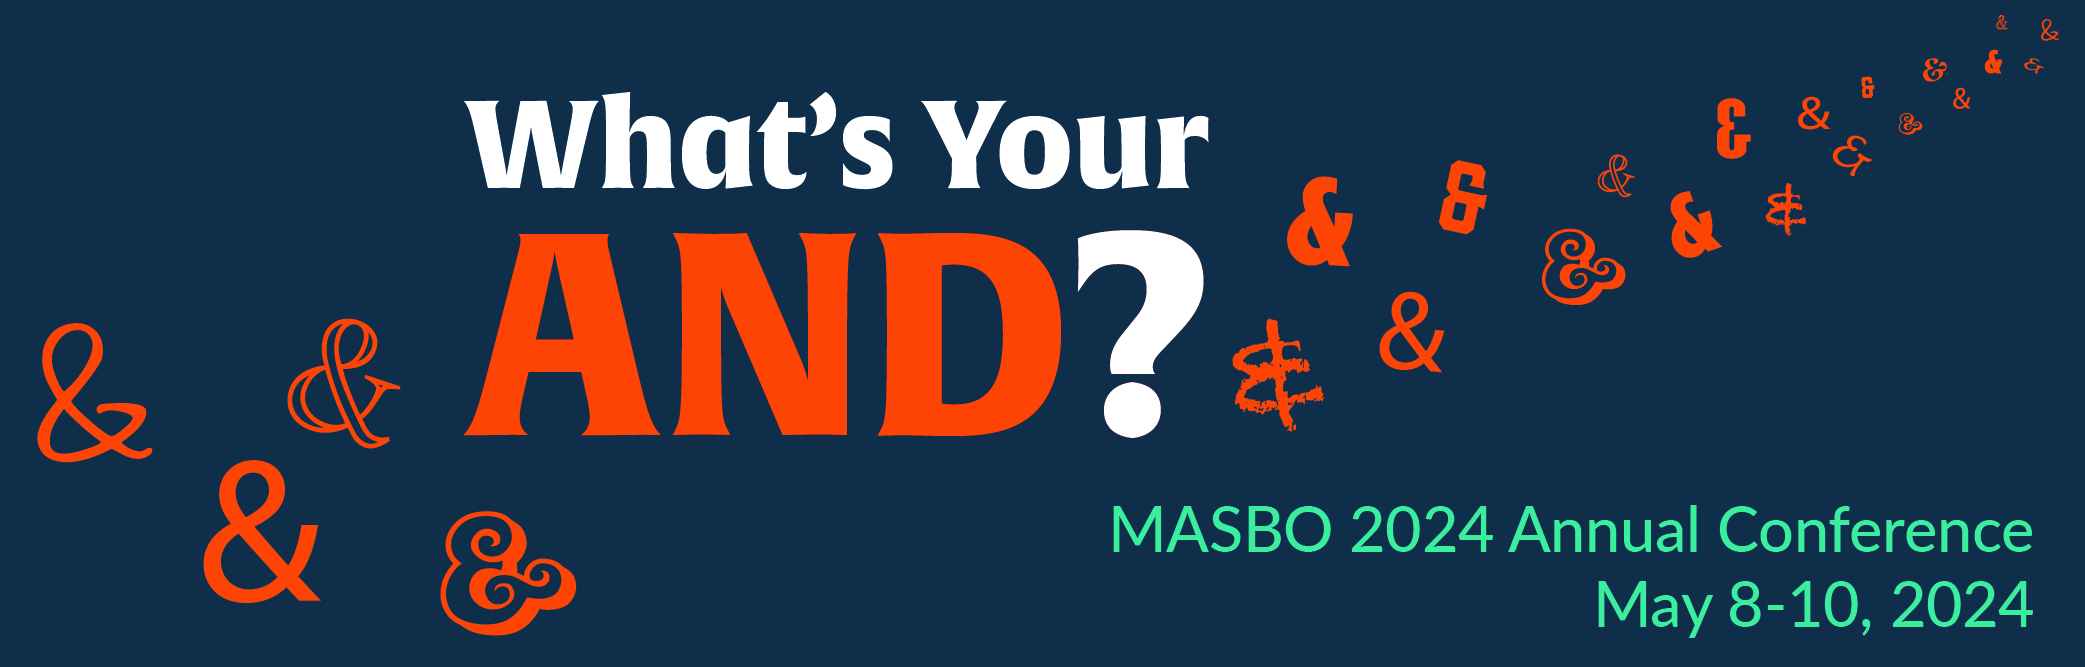 MASBO Annual Conference - What's your AND?